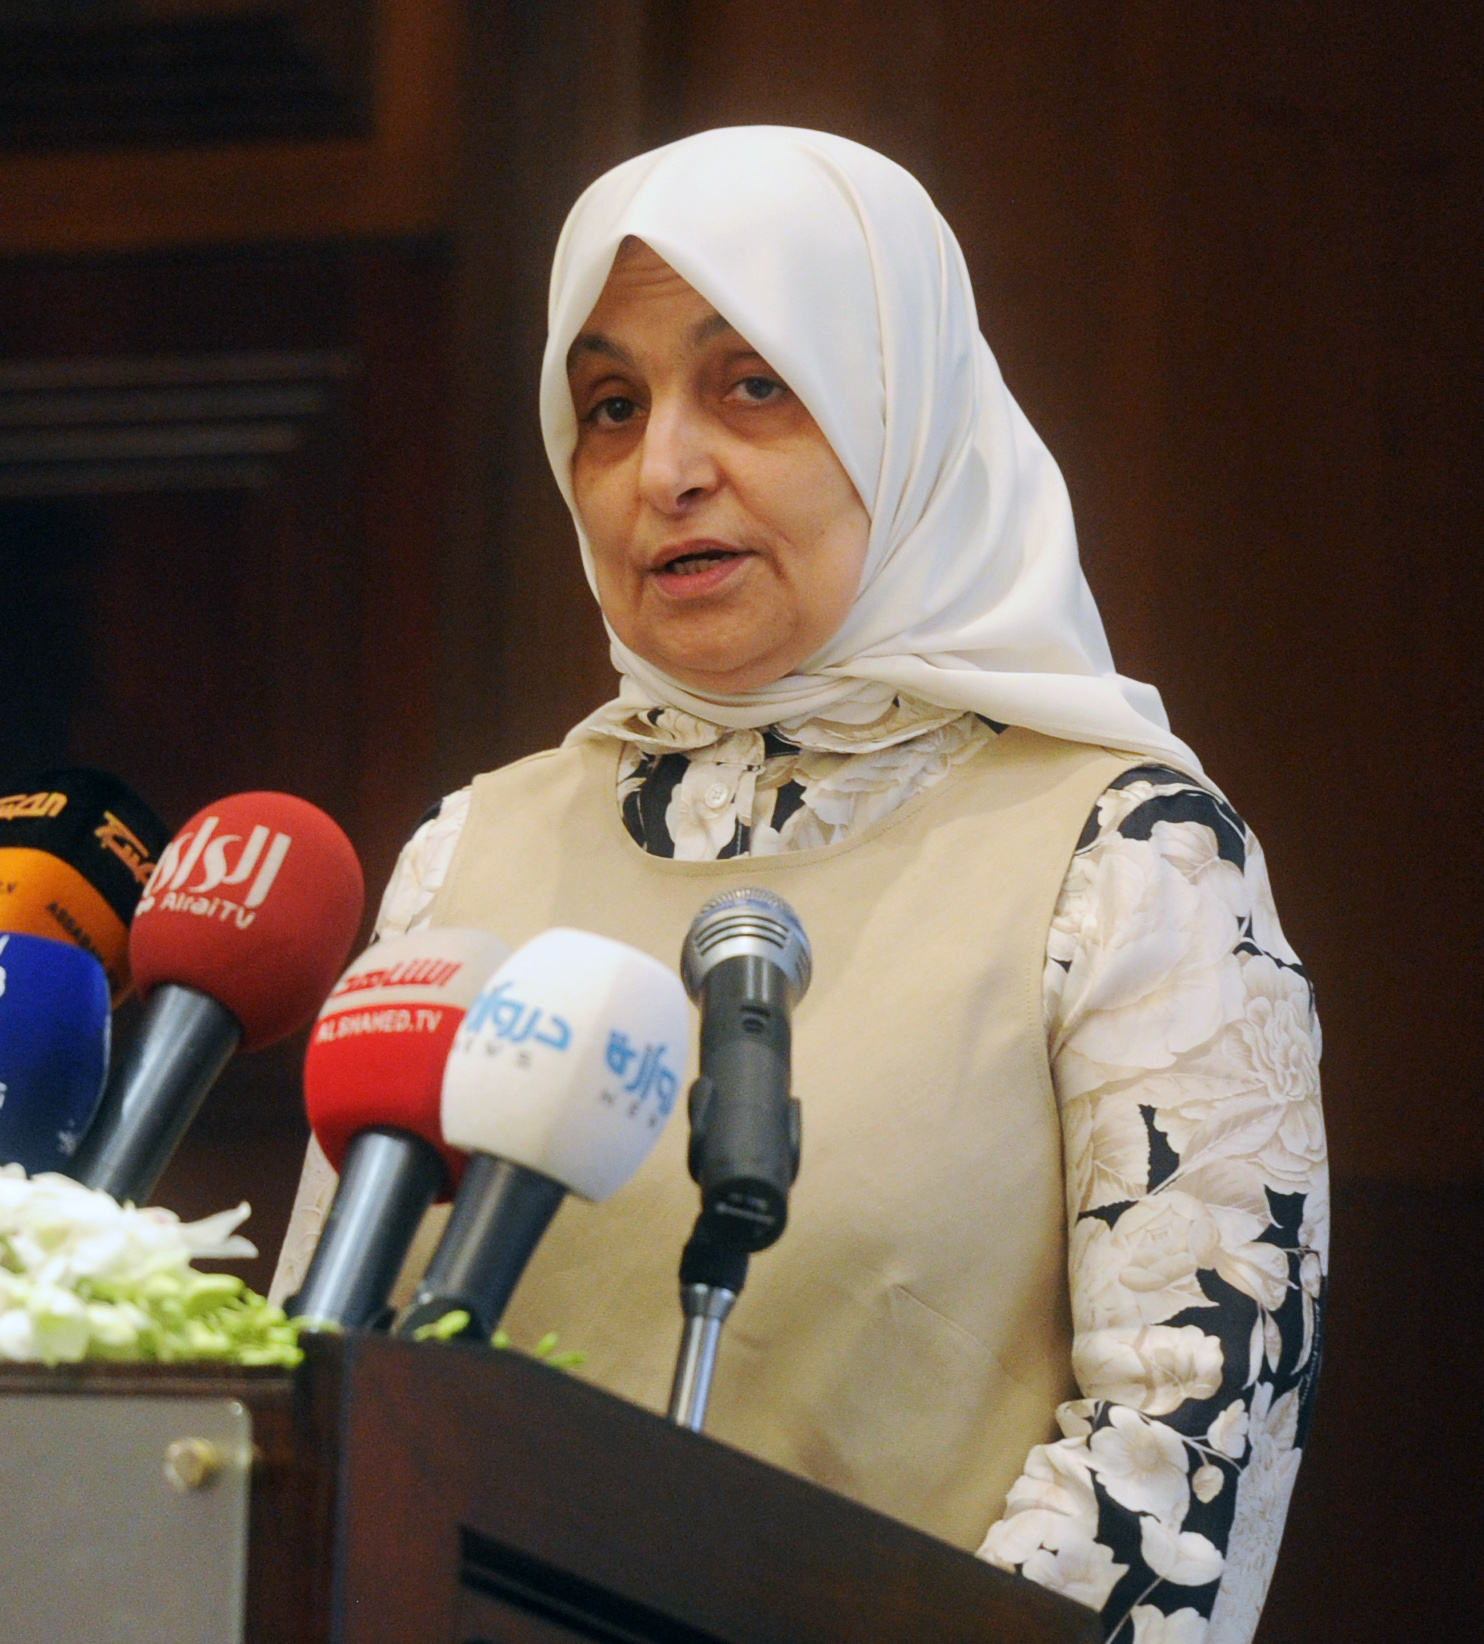 Minister of Social Affairs and Labor and Minister of State for Planning and Development Hind Al-Sabeeh speaking at the "Decision 2015" conference 